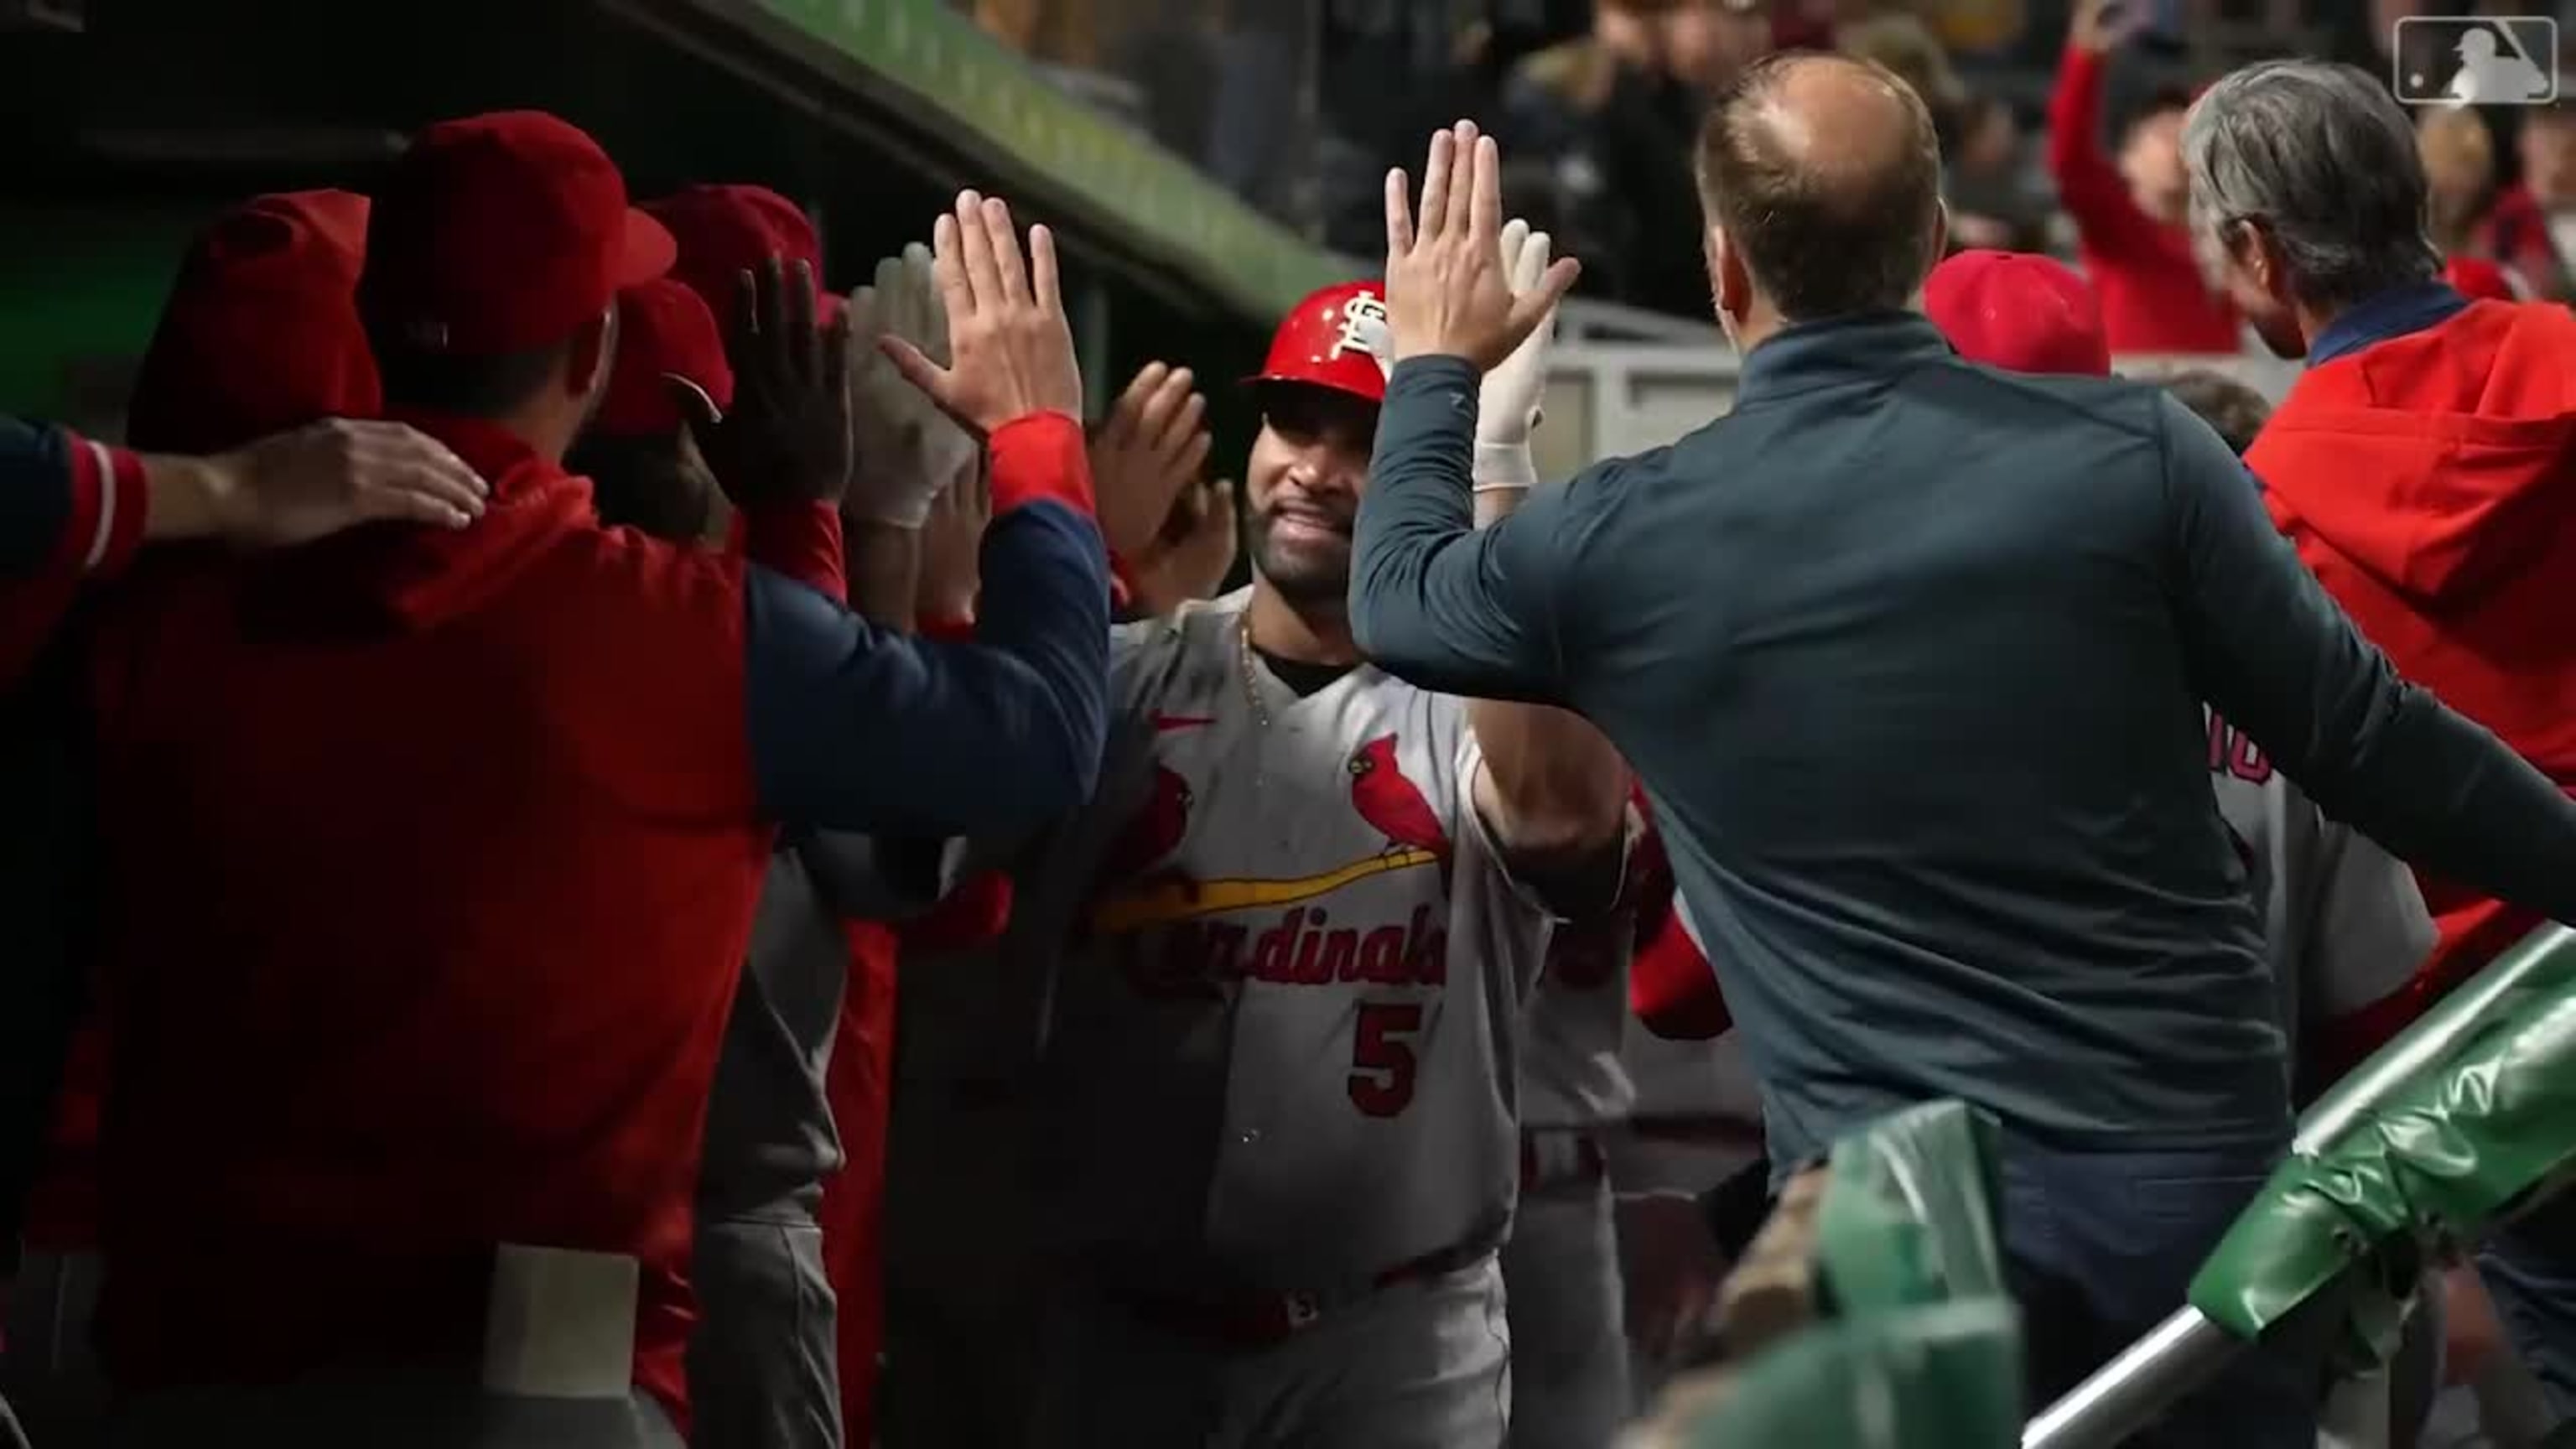 Cardinals Fan Who Caught Pujols' 703rd Home Run Loses Out on Big Payday, St. Louis Metro News, St. Louis